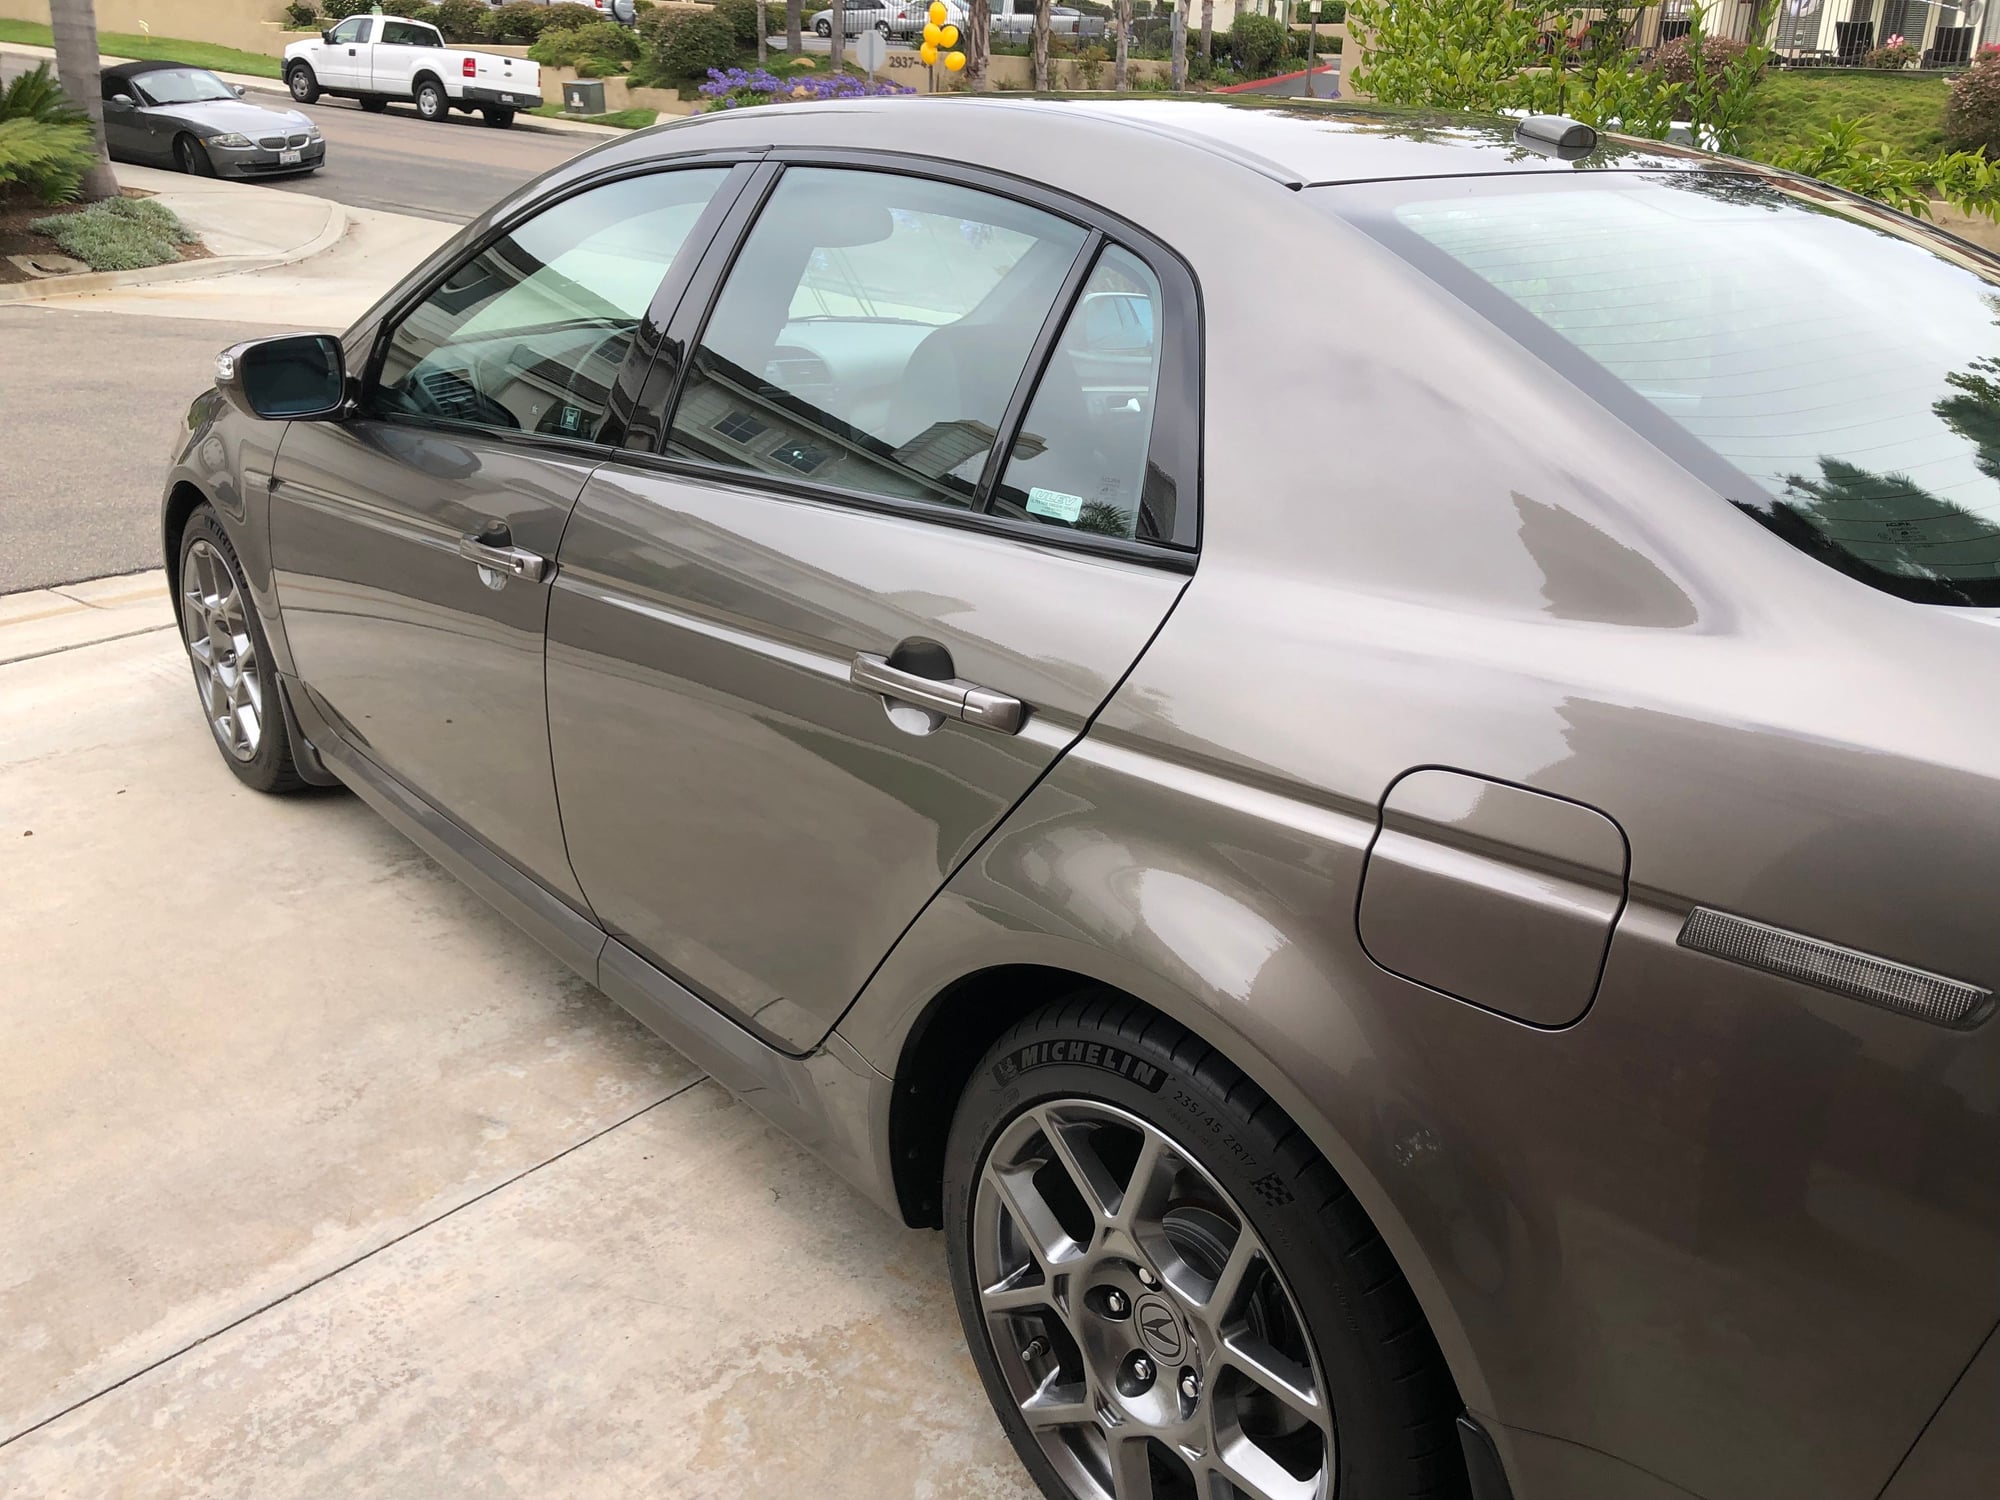 2008 Acura TL - FS: 2008 Acura TL Type-S with 46k miles - Used - VIN 19UUA76518A039049 - 46,834 Miles - 6 cyl - 2WD - Automatic - Sedan - Other - Carlsbad, CA 92009, United States